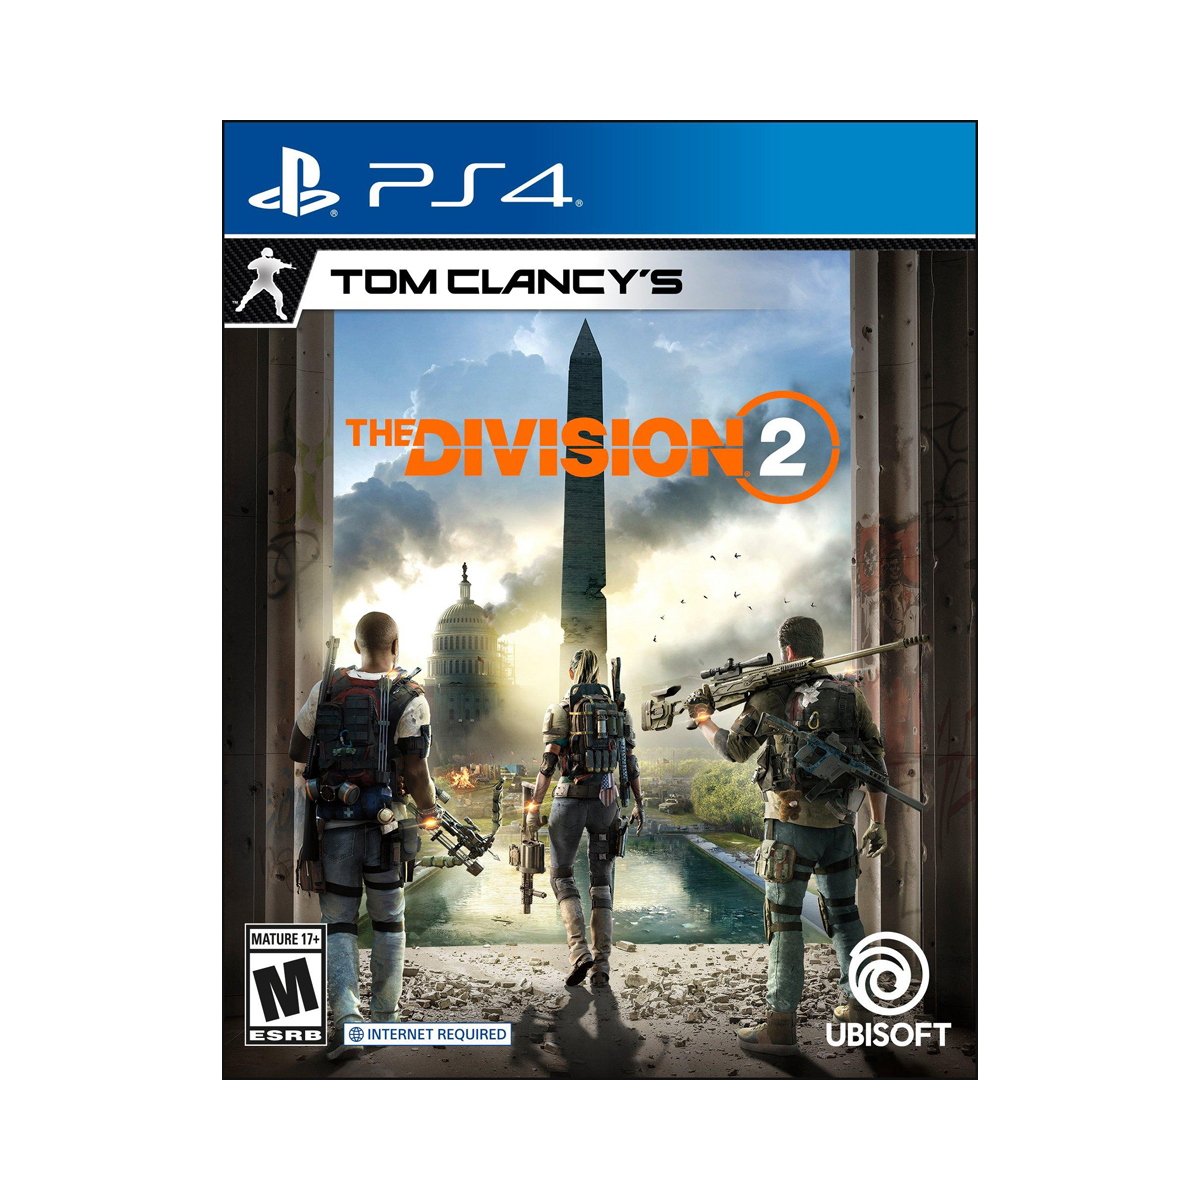 Sony - Tom Clancy's: The Division 2 - PS4